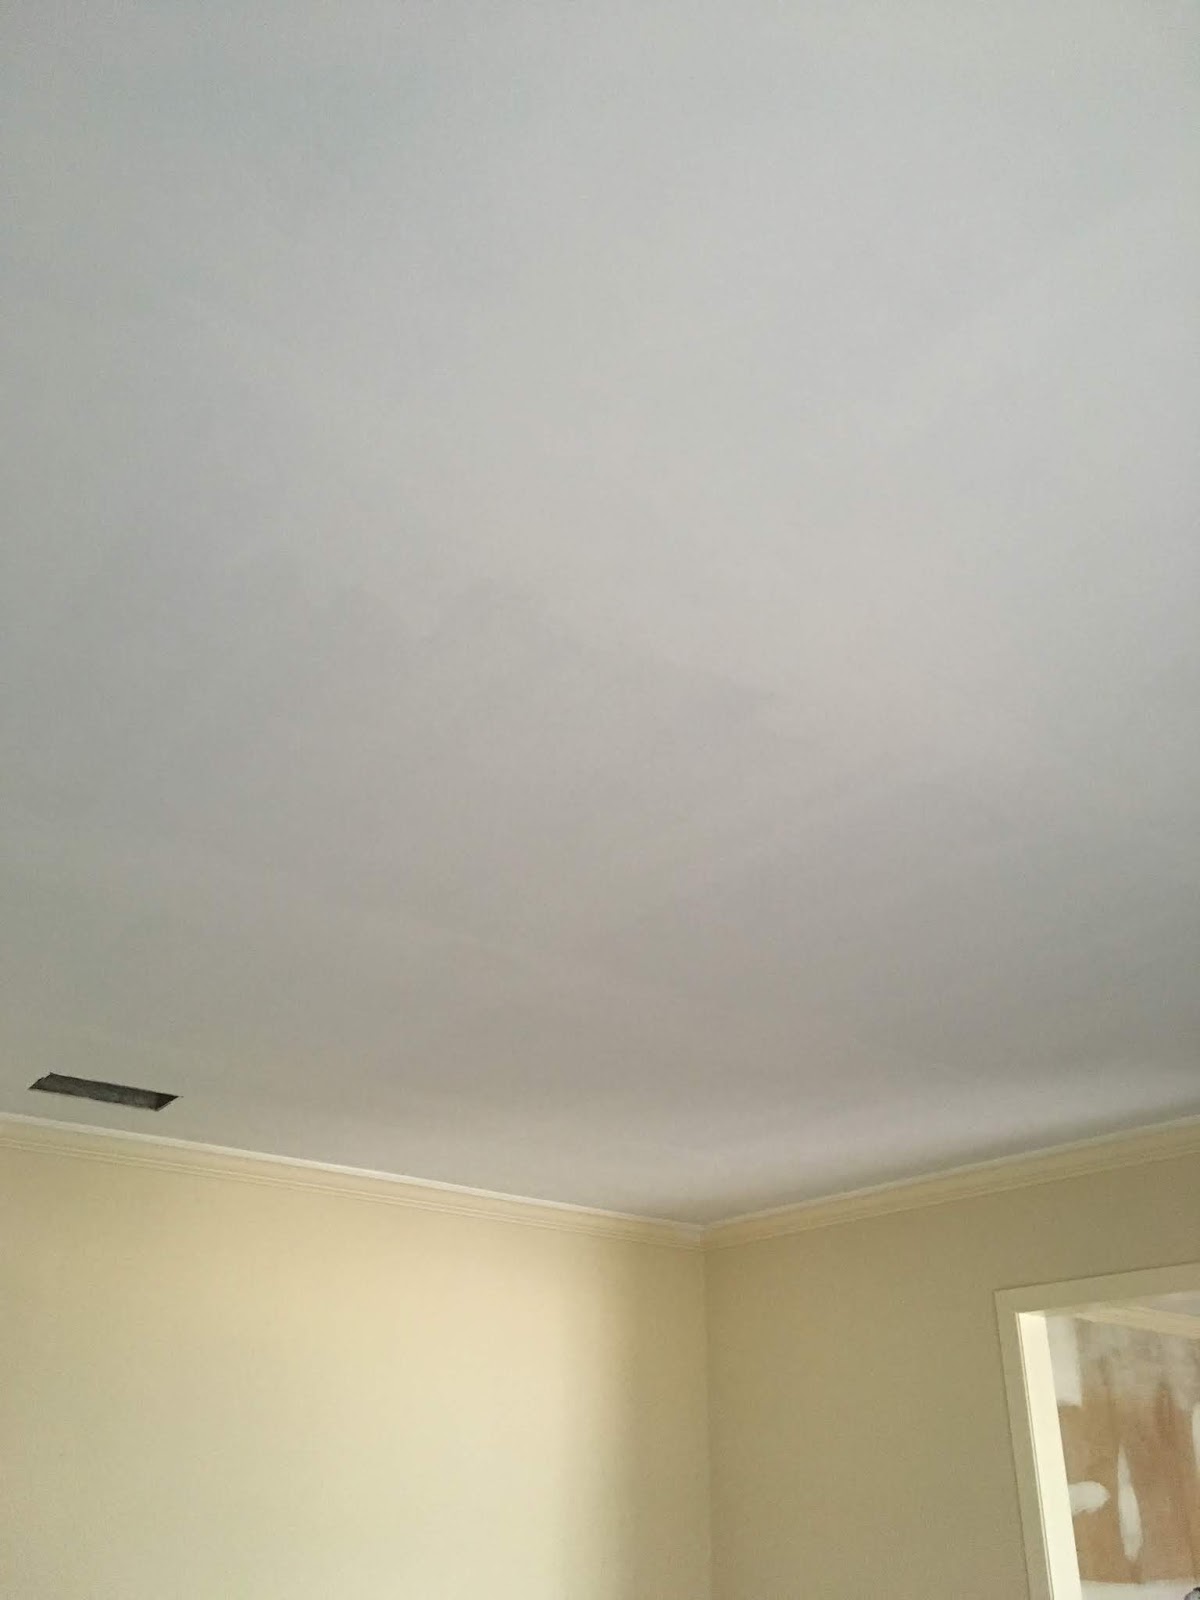 Finishing Ceilings After Popcorn